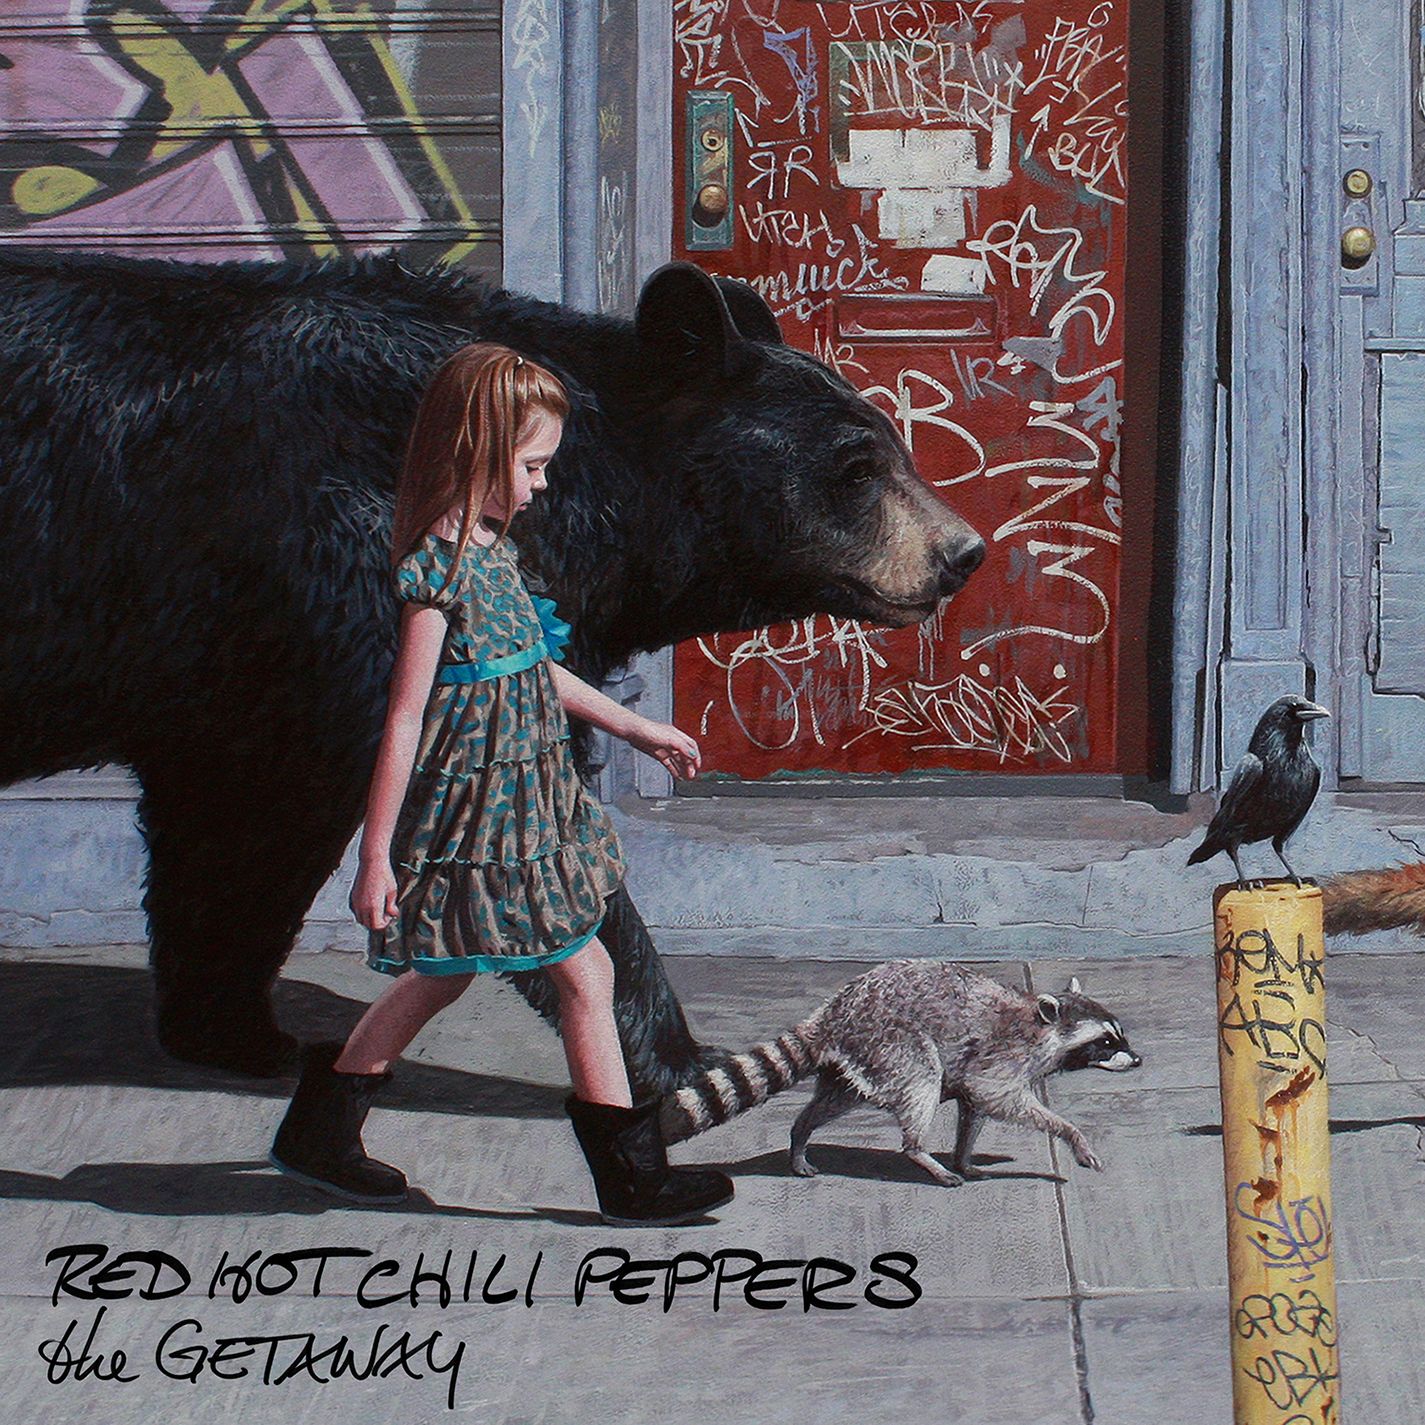 Red Hot Chili Peppers - The Getaway (2016) [Qobuz FLAC 24bit/48kHz]